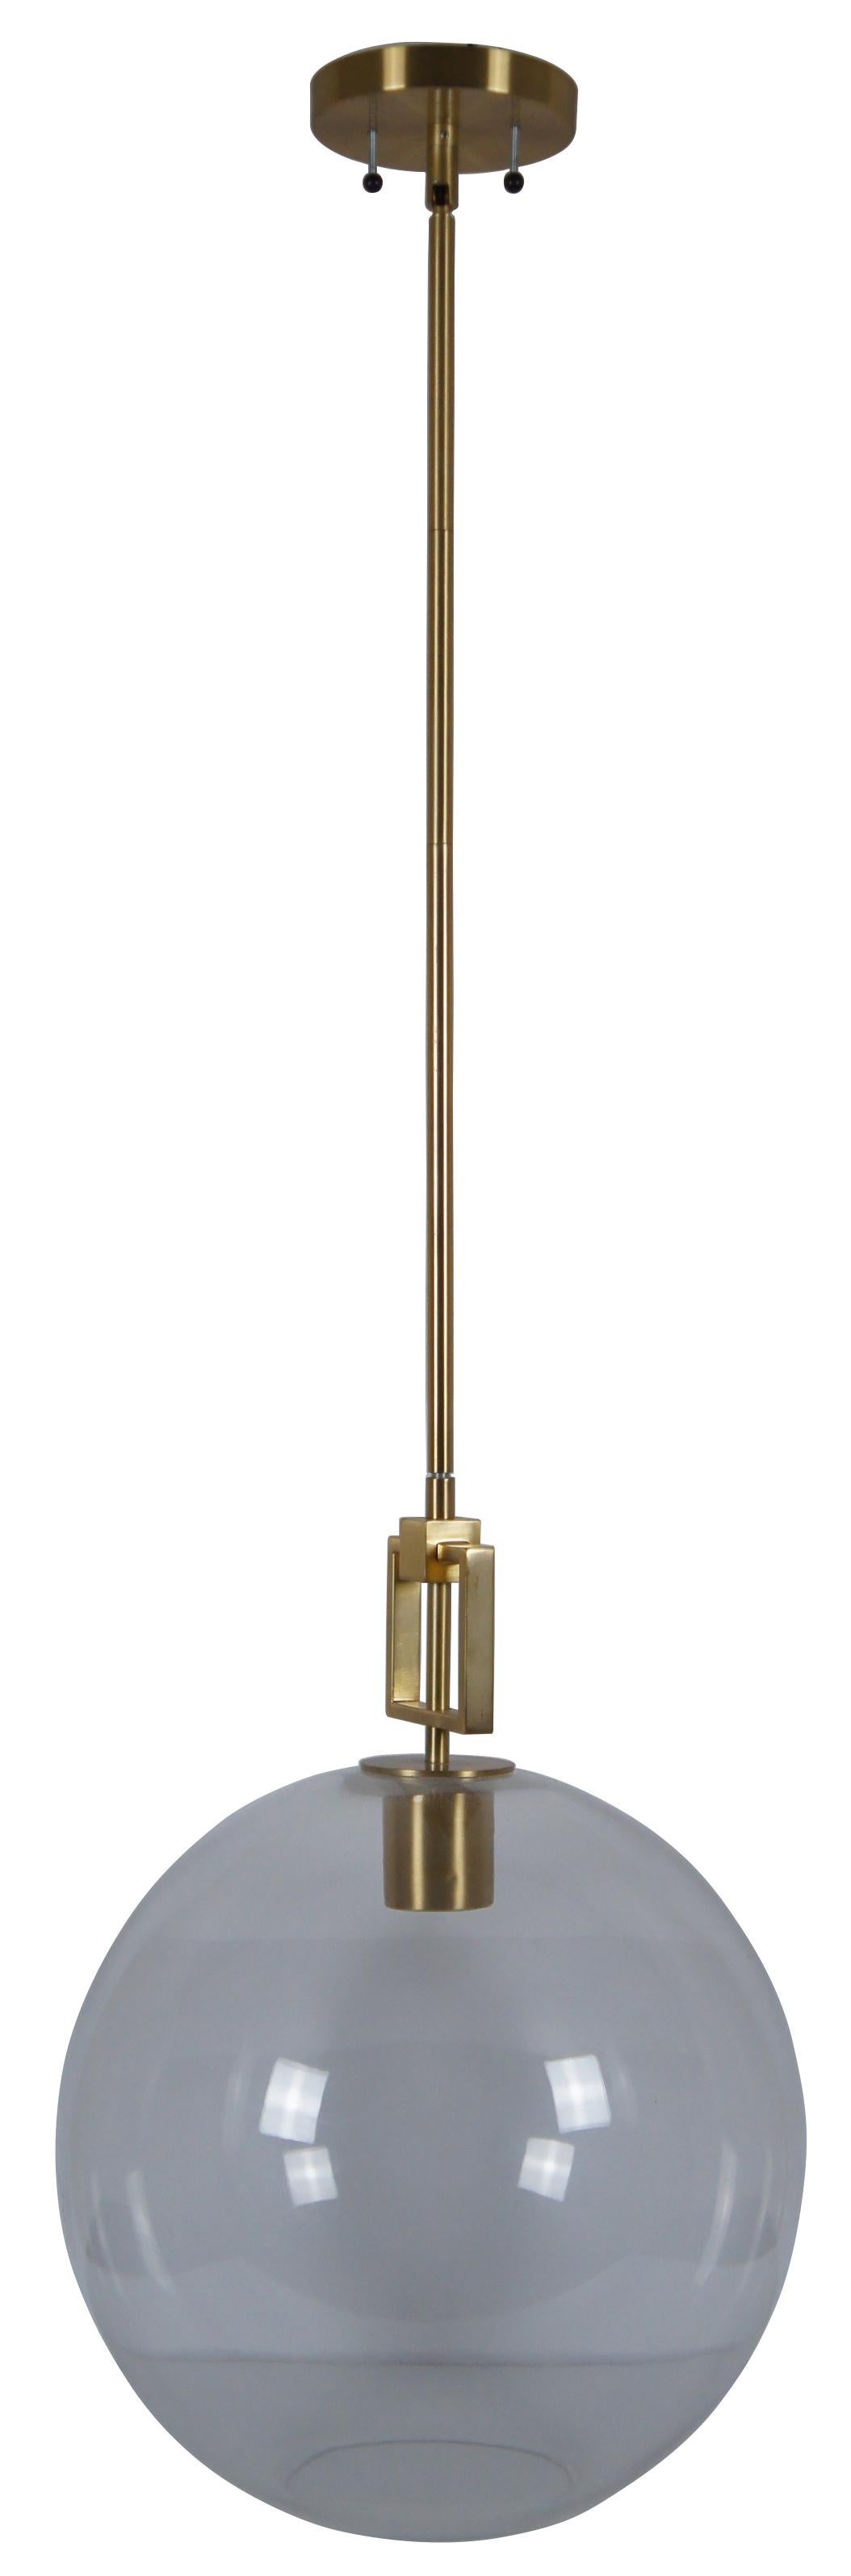 Ballard designs Fiona glass globe pendant ceiling fixture with geometric brass drop. Sleek industrial lines to lighten and brighten your island, entry, bar or dining area.

Measures: Length of drop 32”.